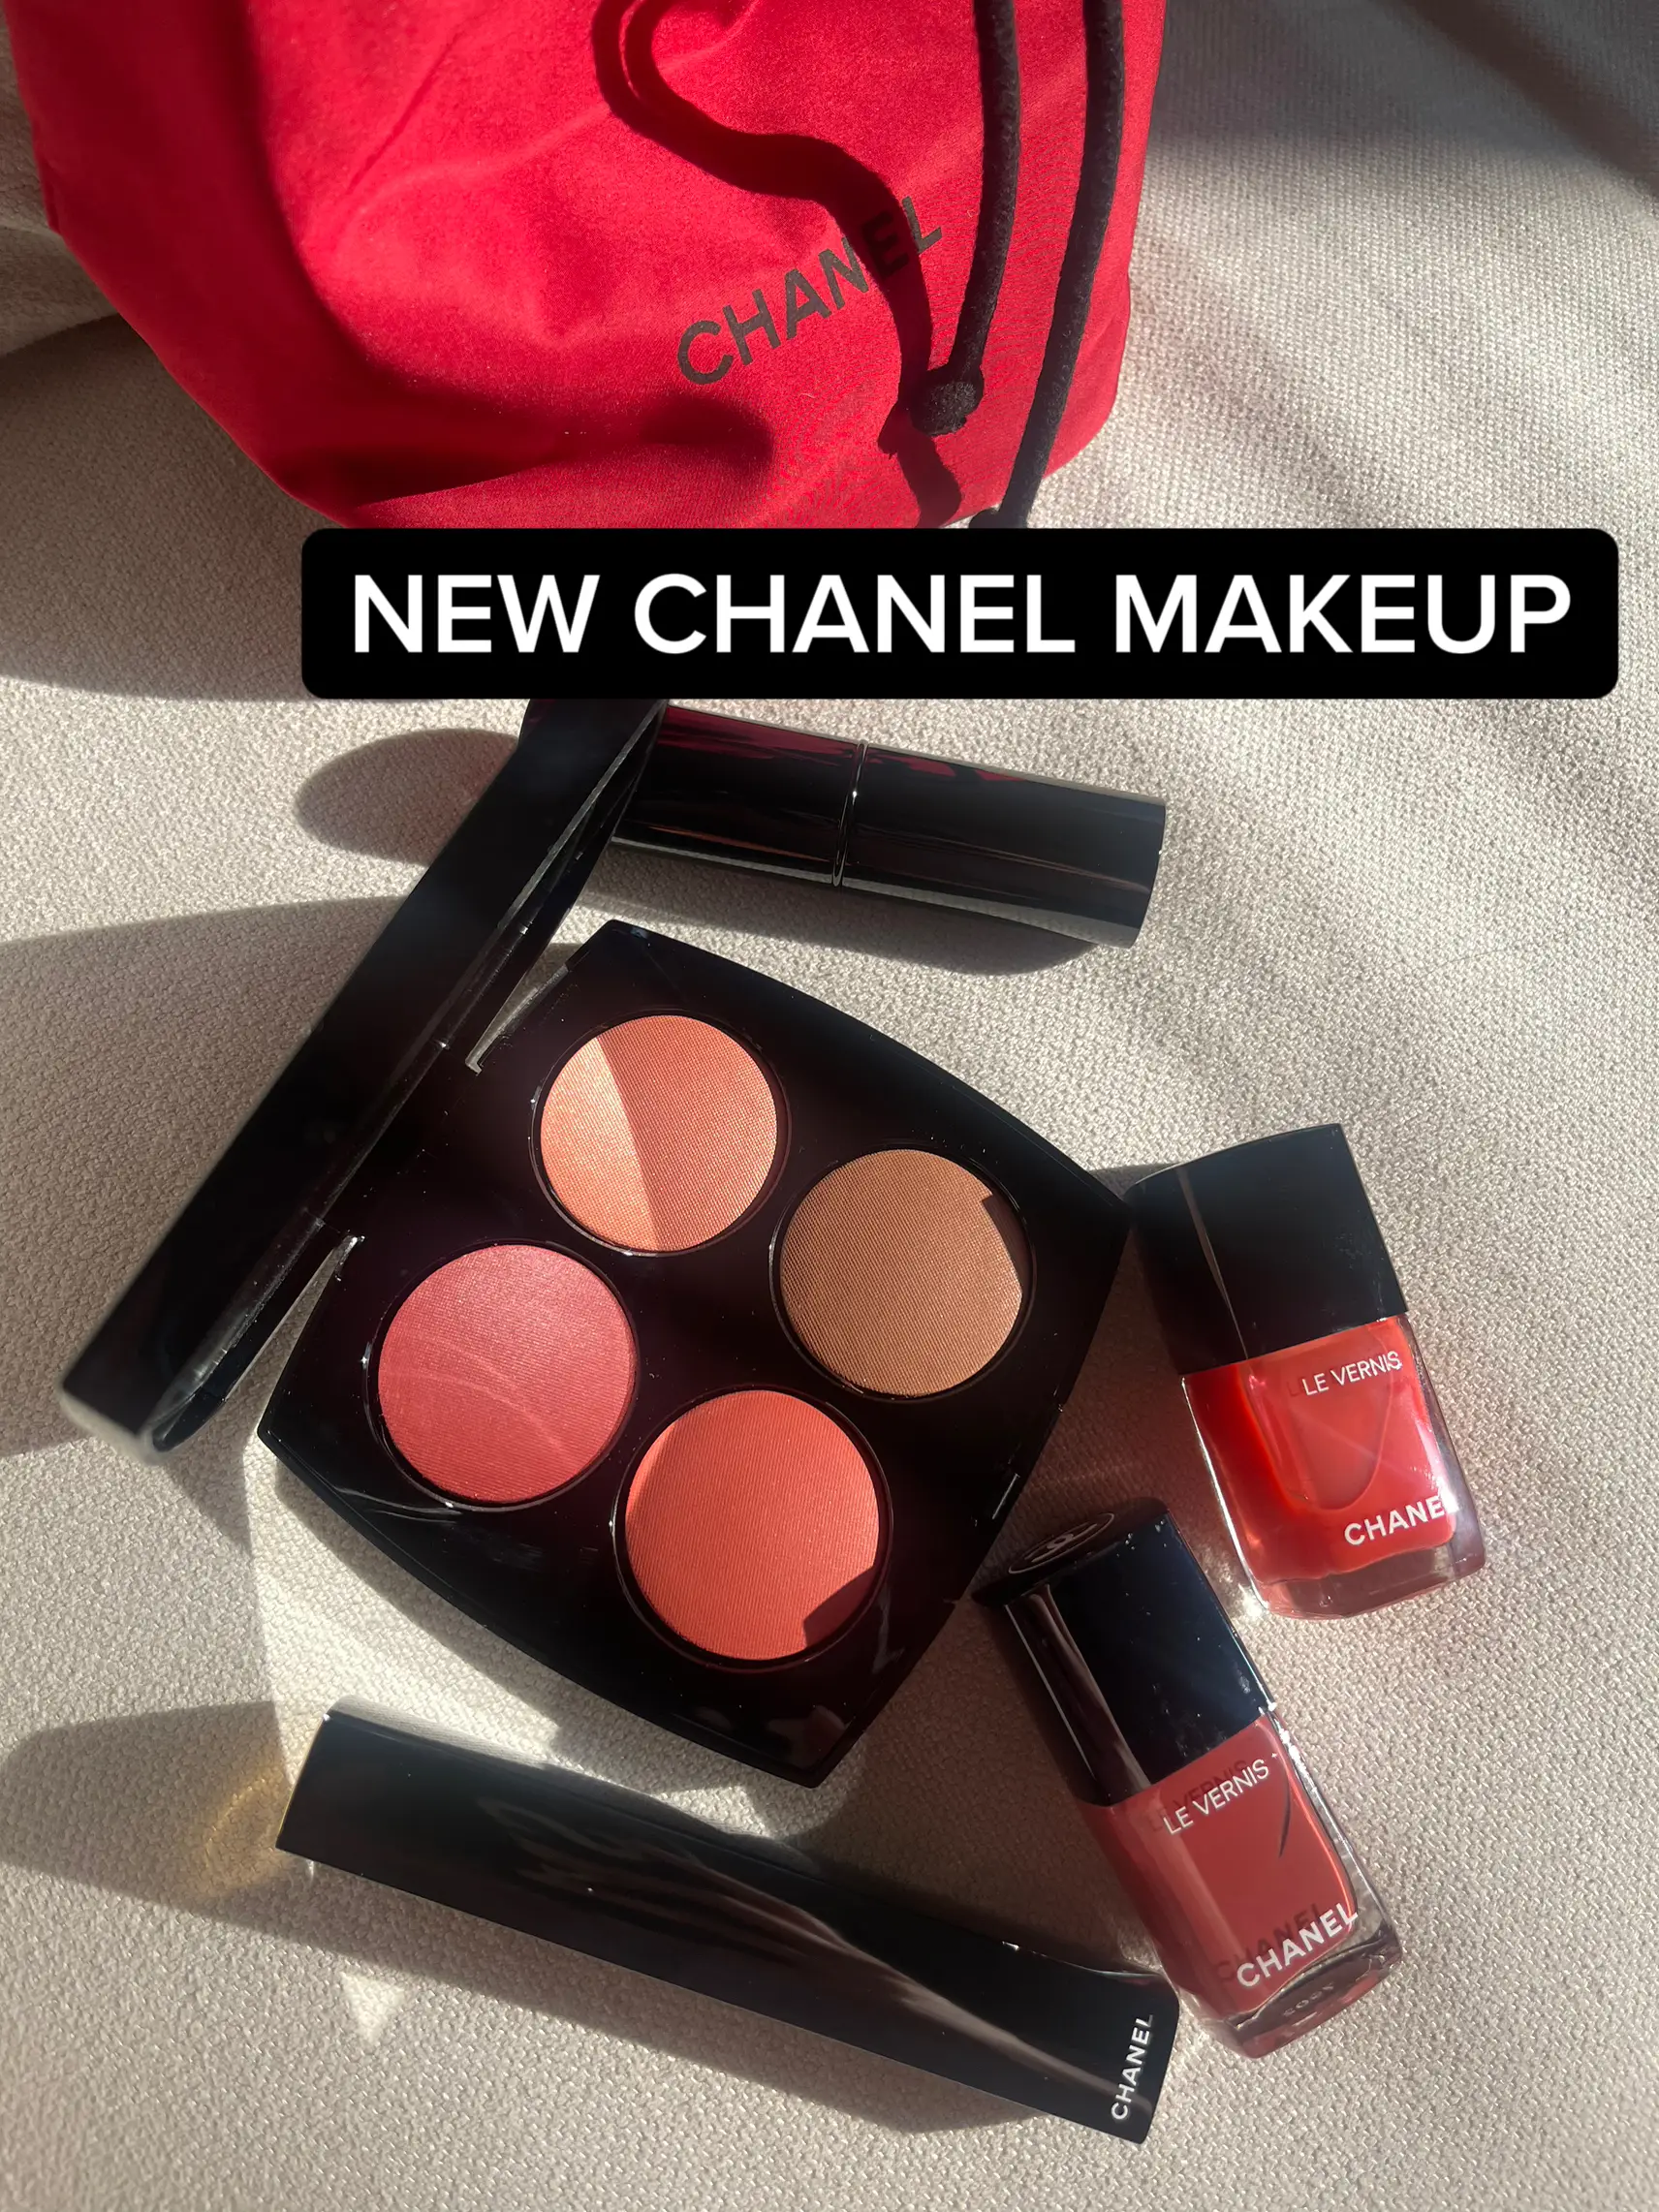 NEW CHANEL MAKEUP COLLECTION 💋, Gallery posted by alexsteinherr